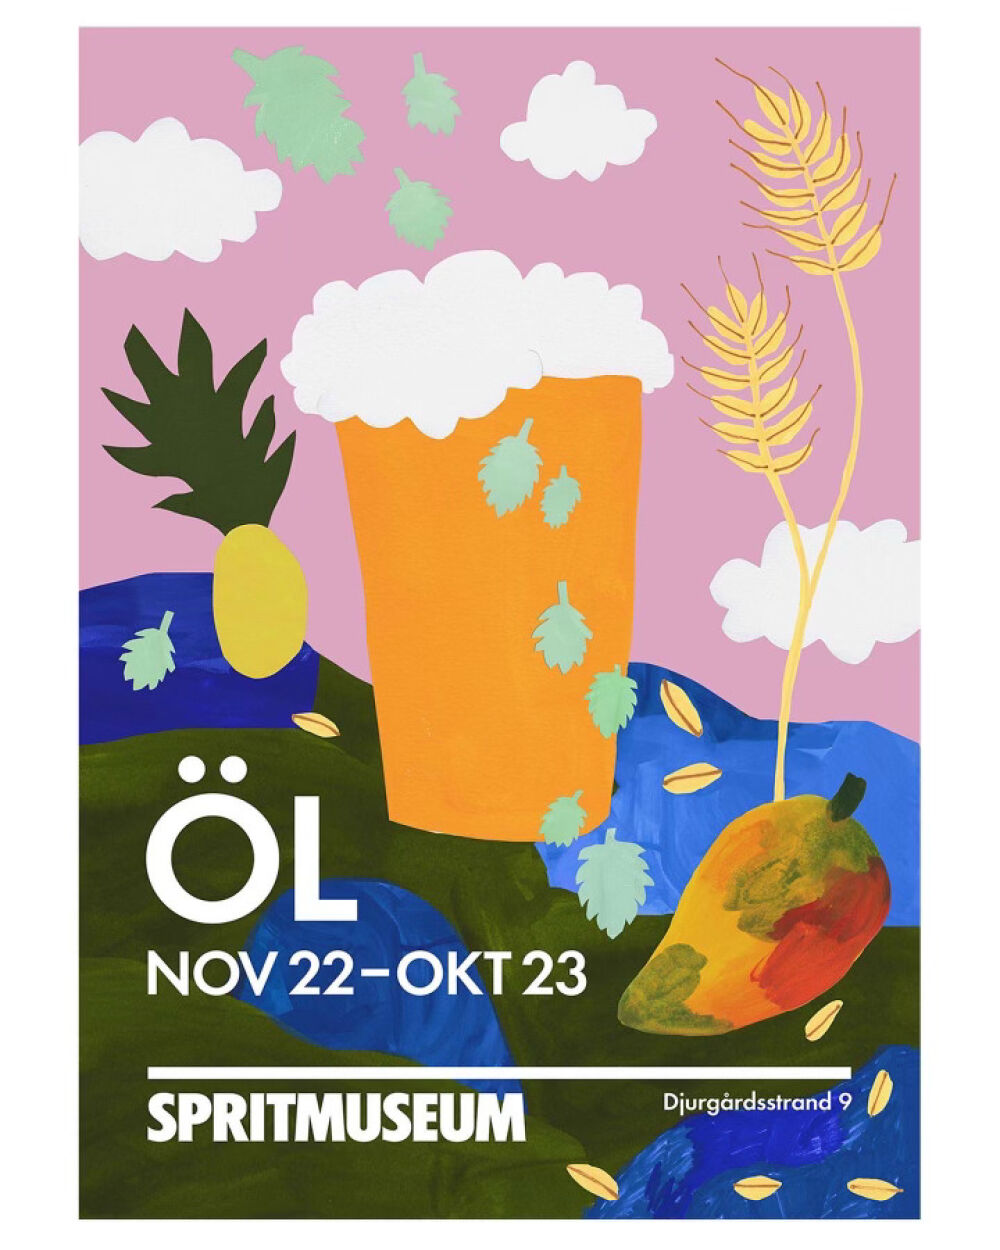 Poster art and branding for Spritmuseum by Yoyo Nasty